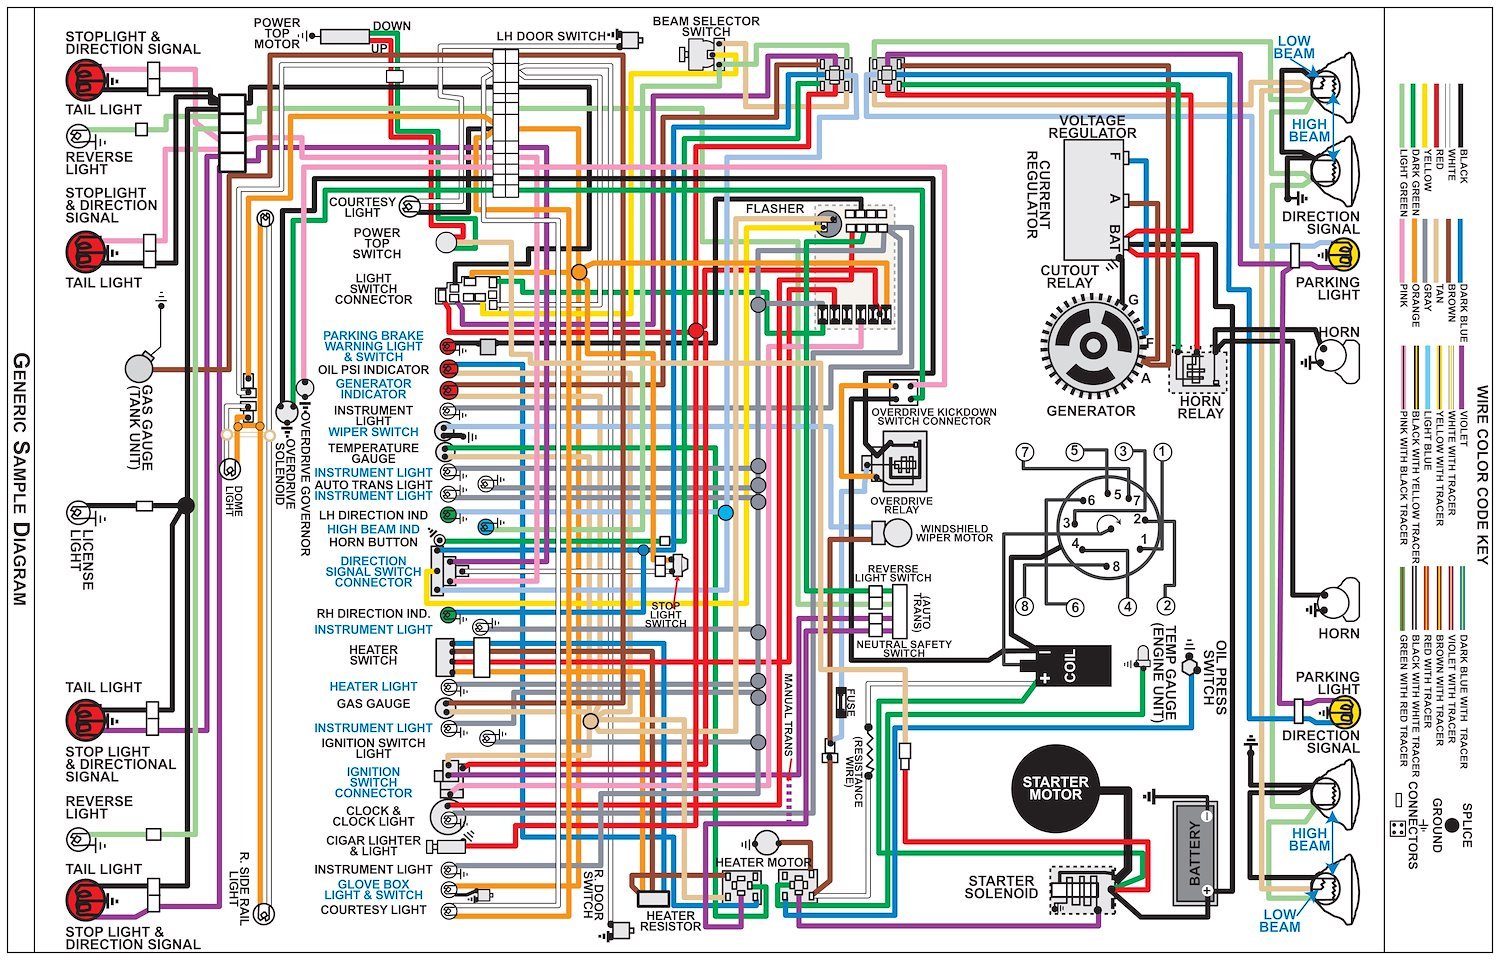 Wiring Diagram for 1965 Ford Falcon, 11 in x 17 in., Laminated